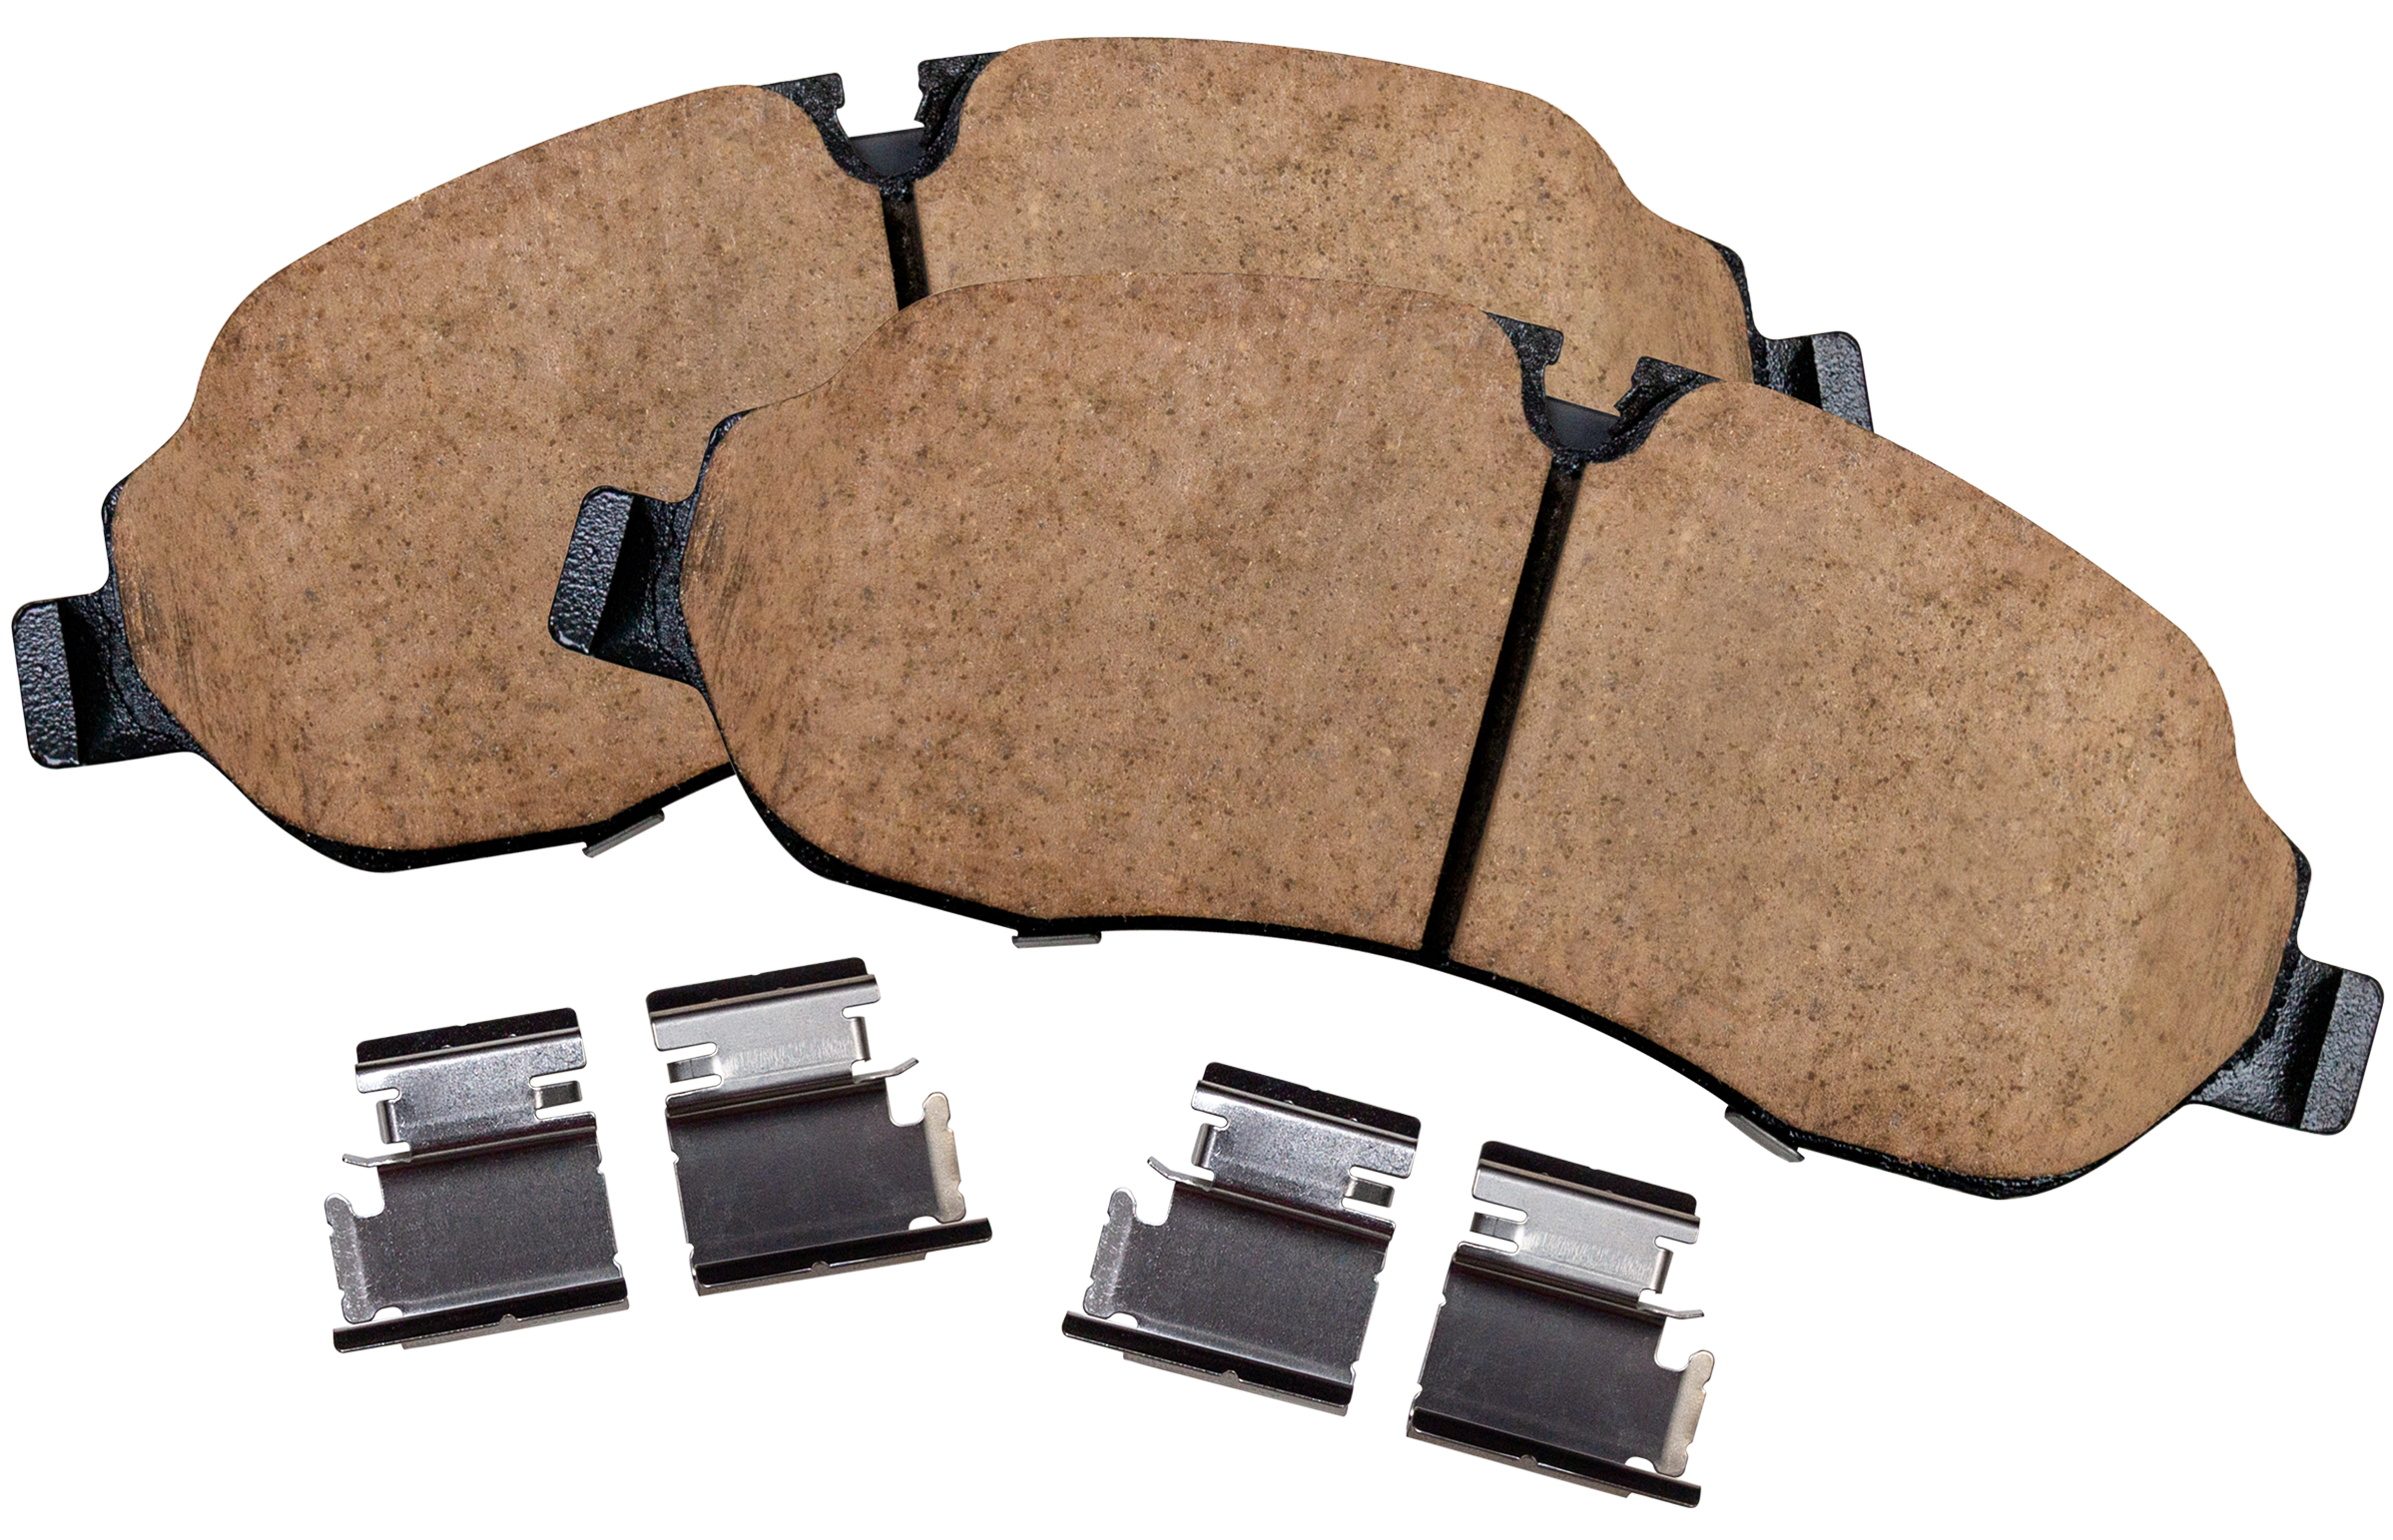 Akebono Brake Experts | The perfect replacement brake pad for